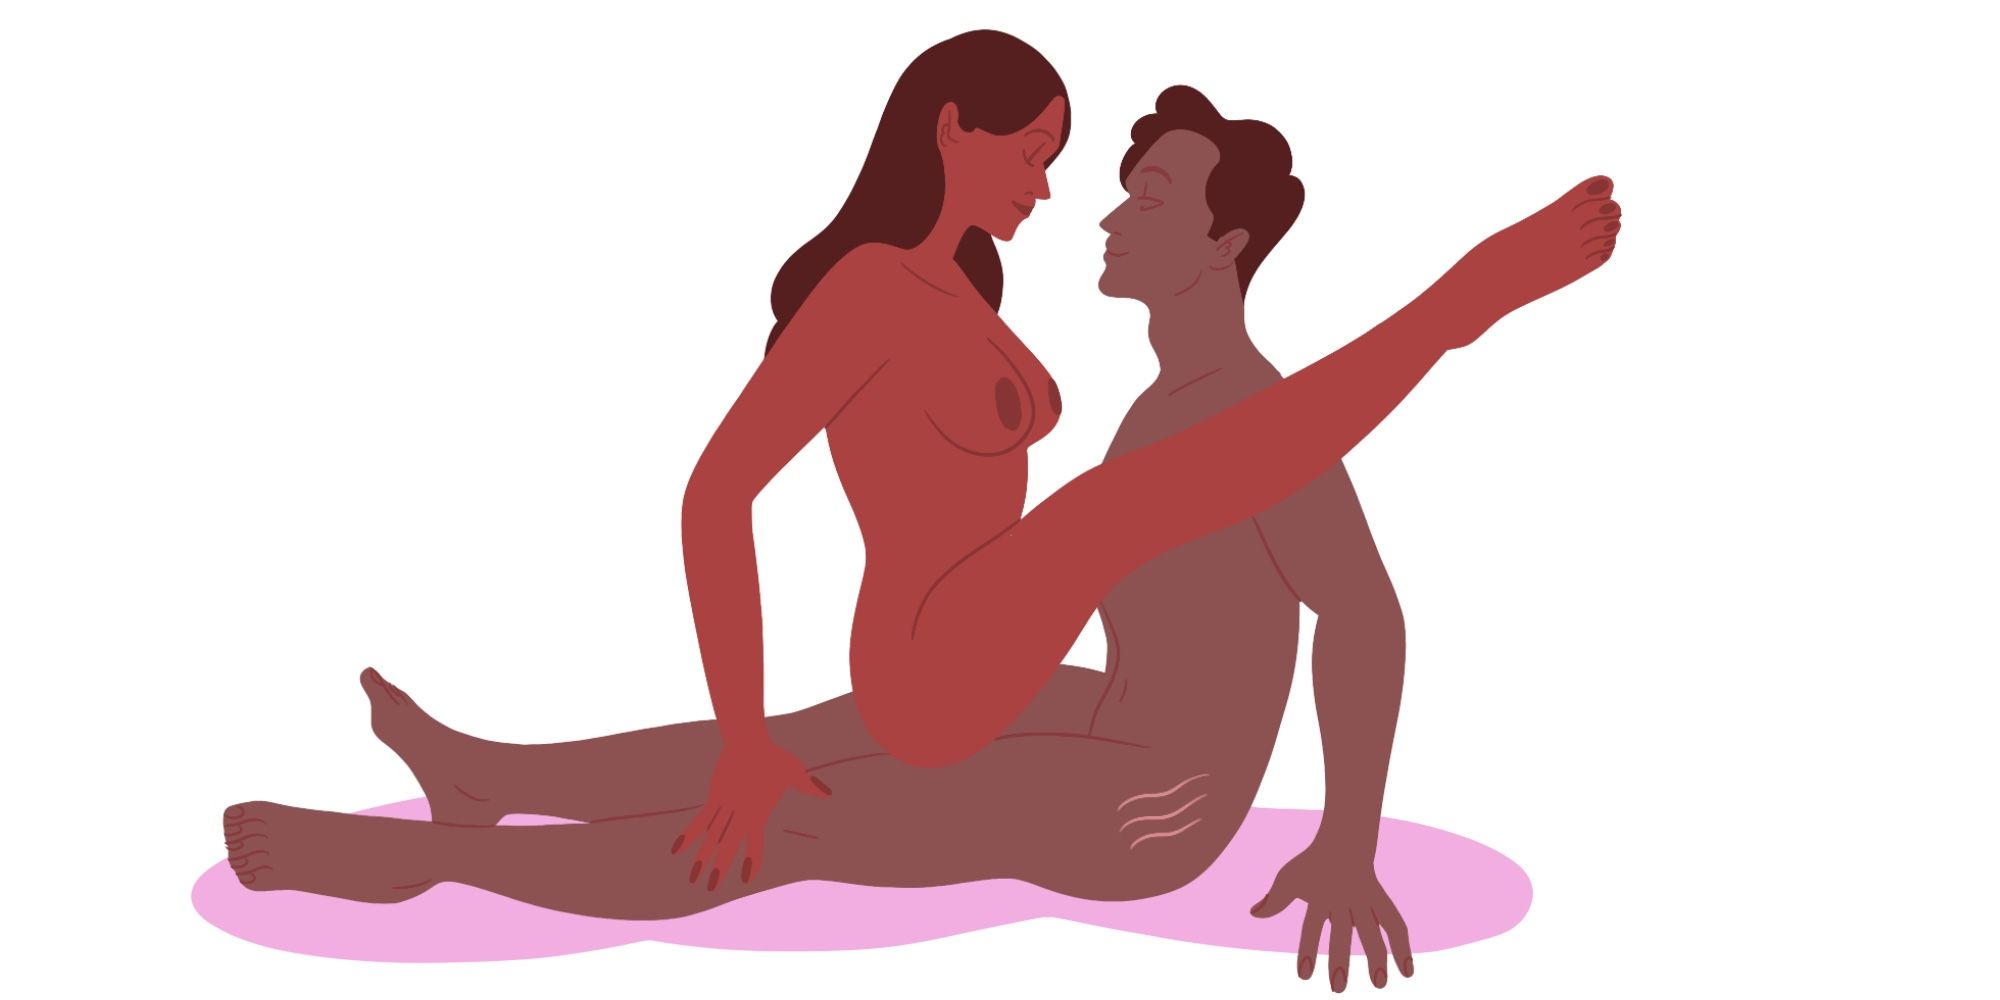 oral sex postions for married partners